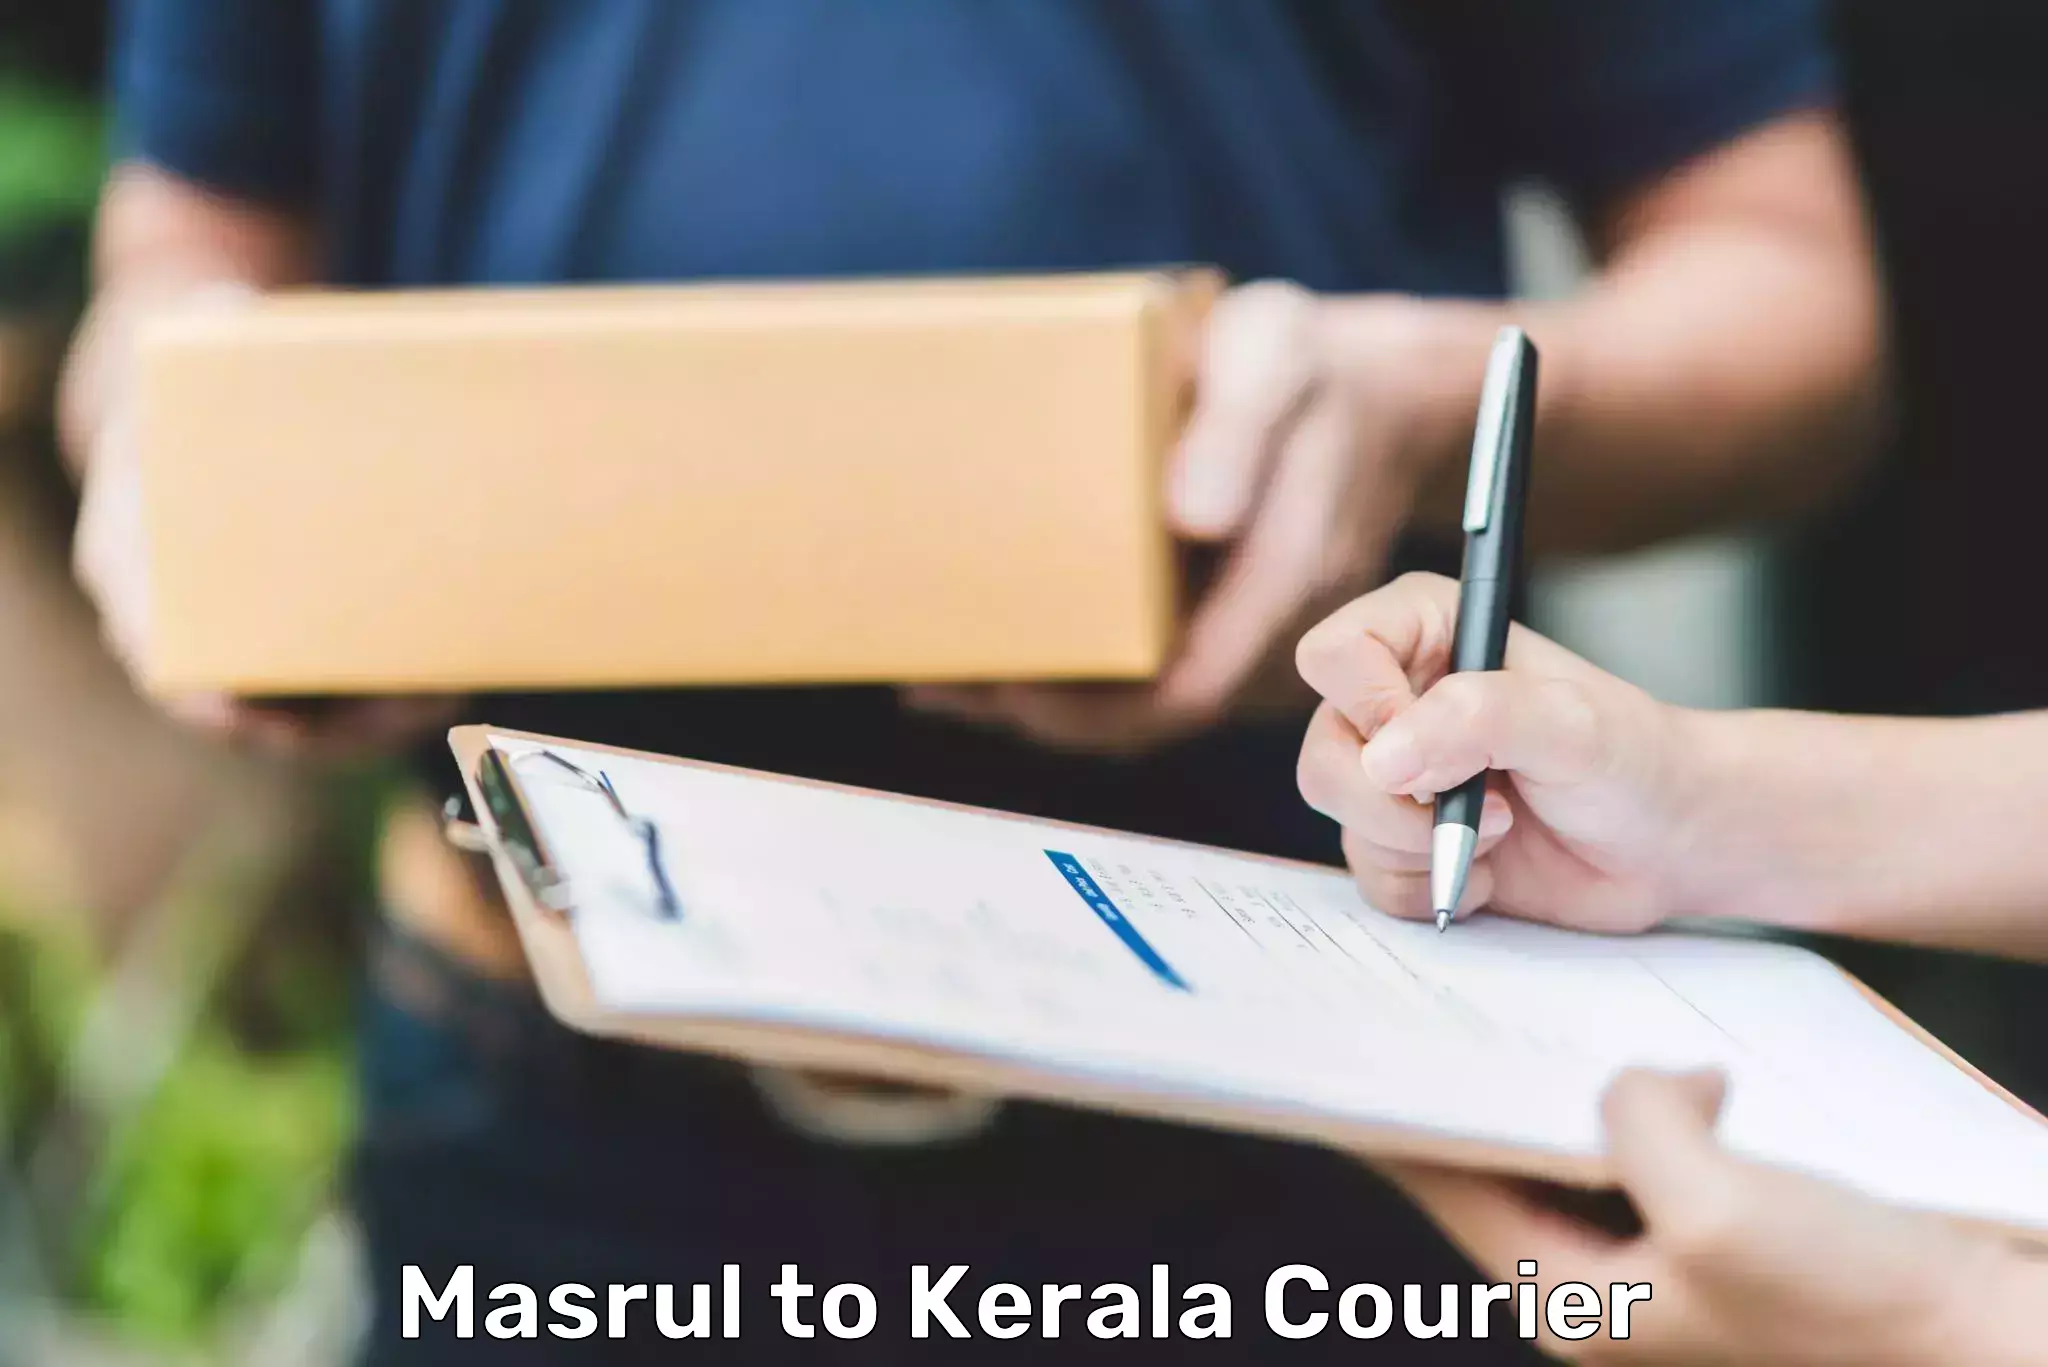 Express delivery network Masrul to Kerala